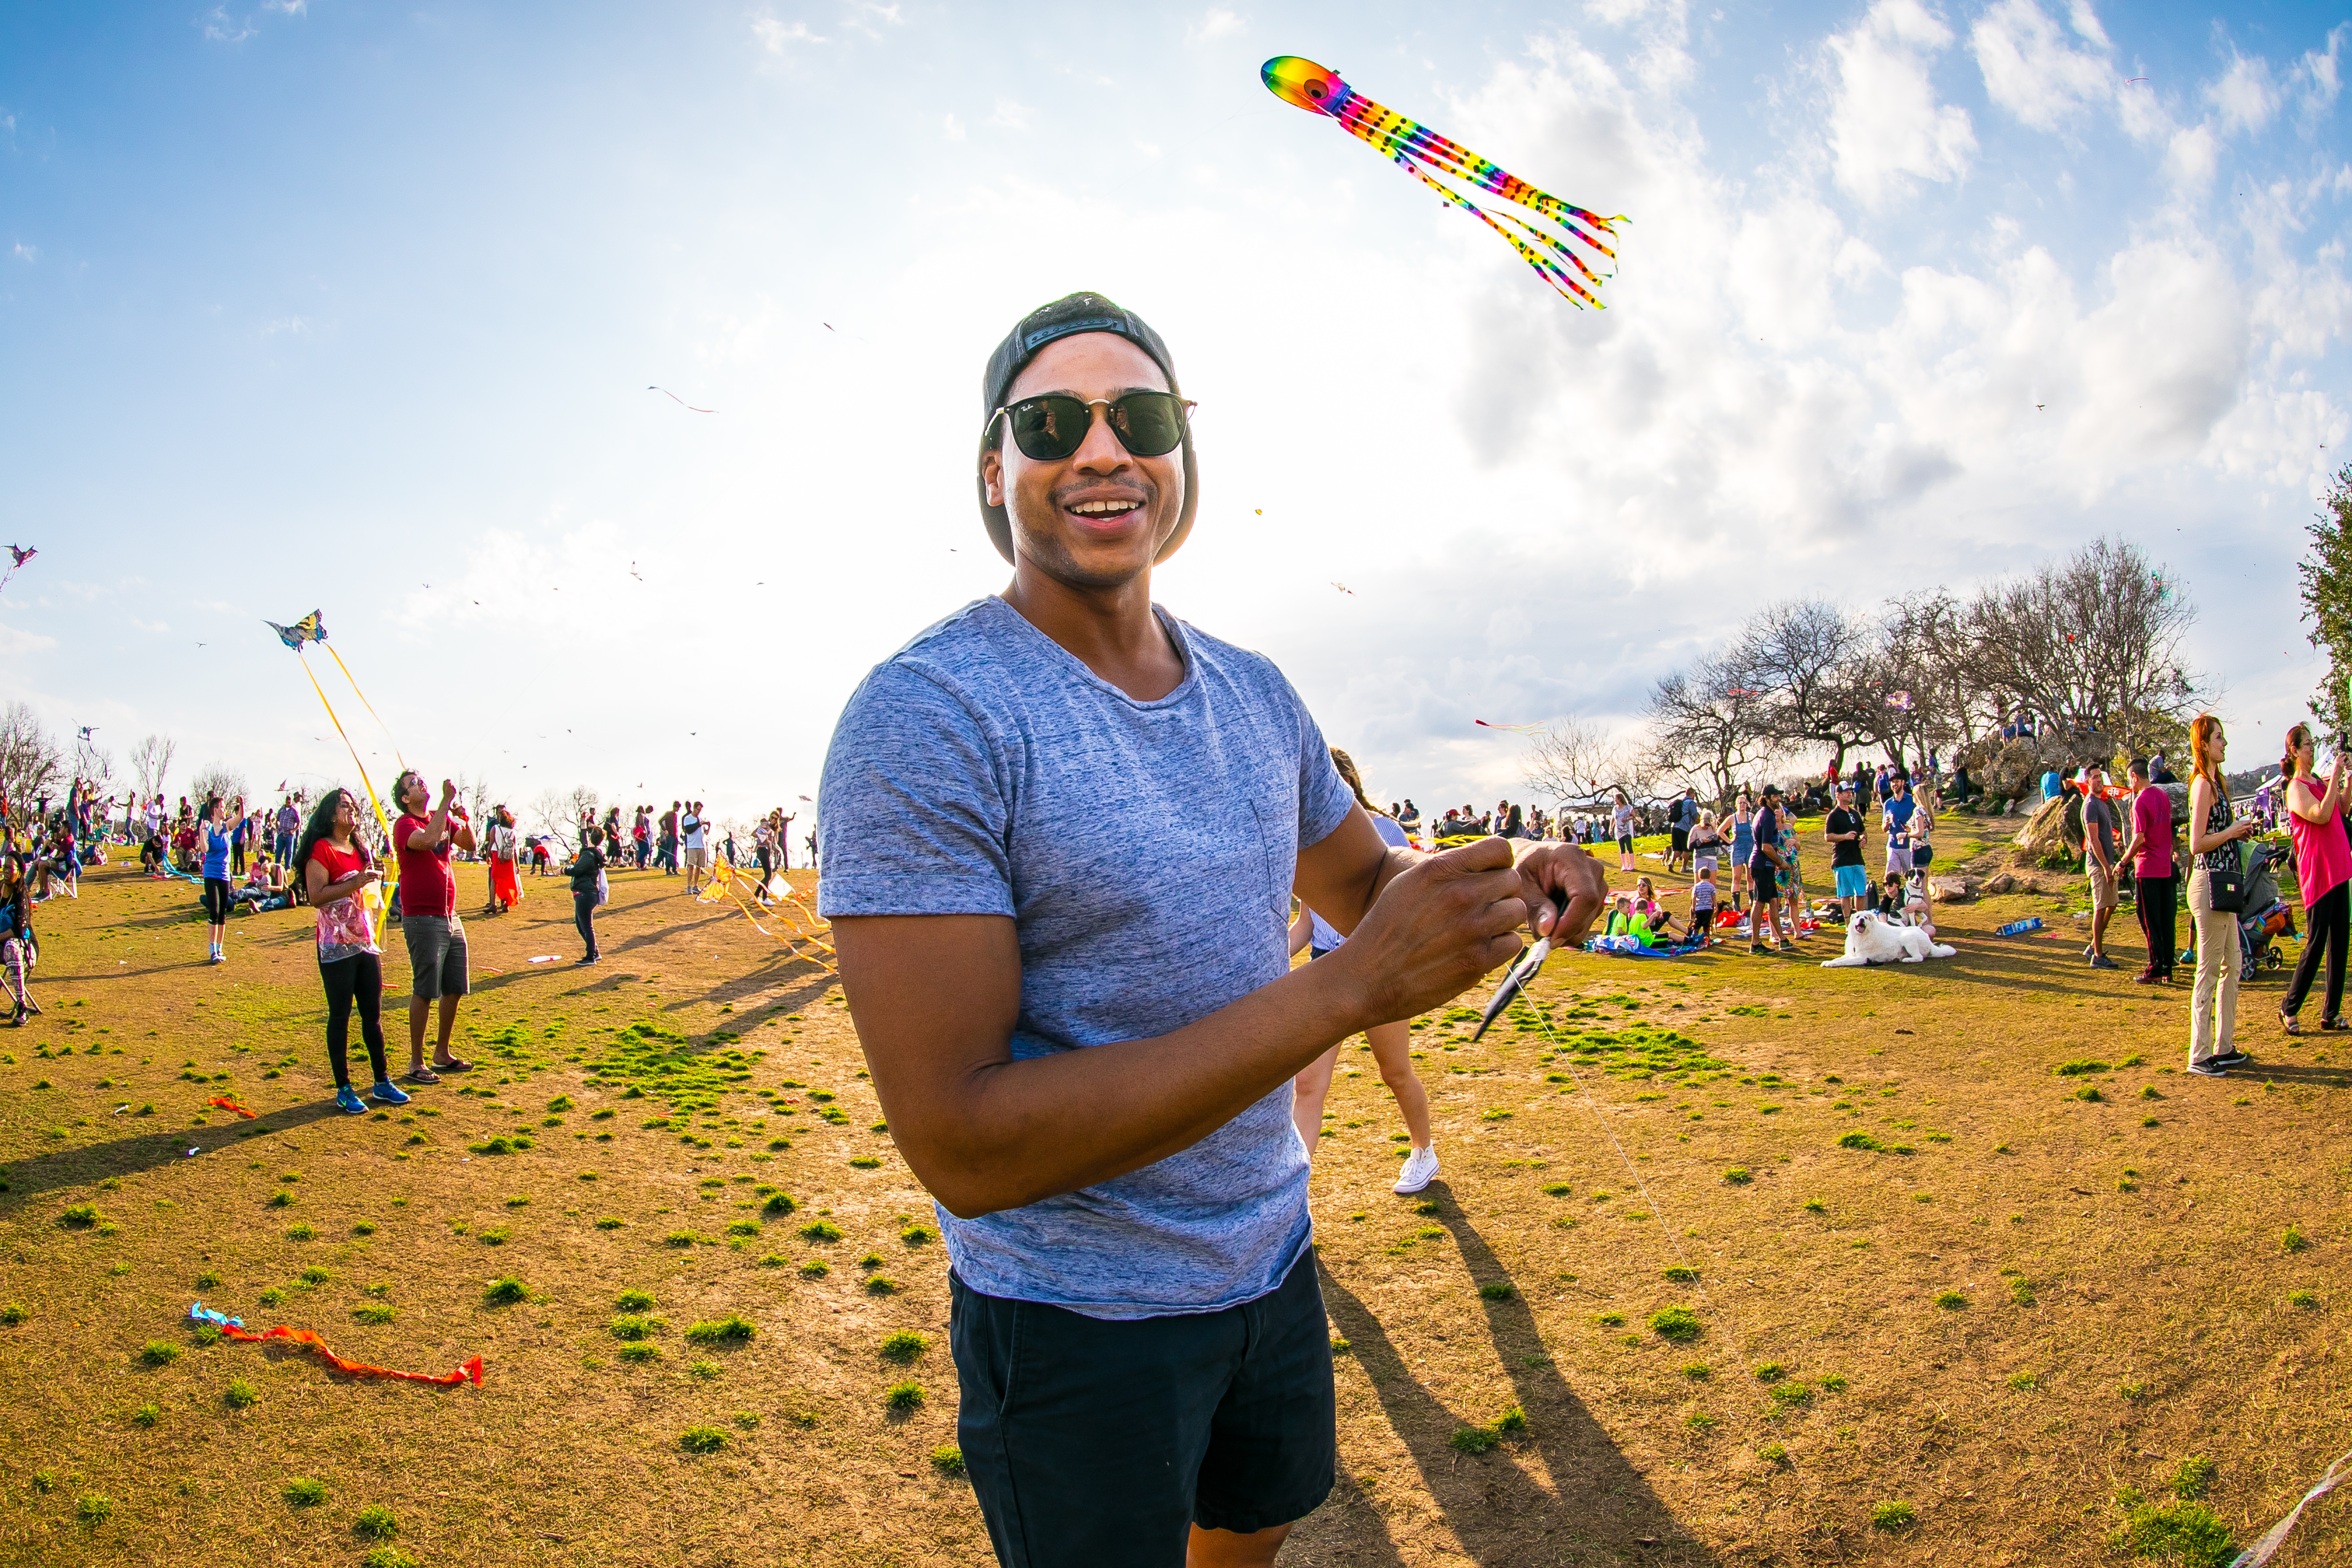 desillusion Punktlighed lastbil ABC Kite Fest Celebrates 90 Years of High-Flying Fun with Austin Families |  Business Wire